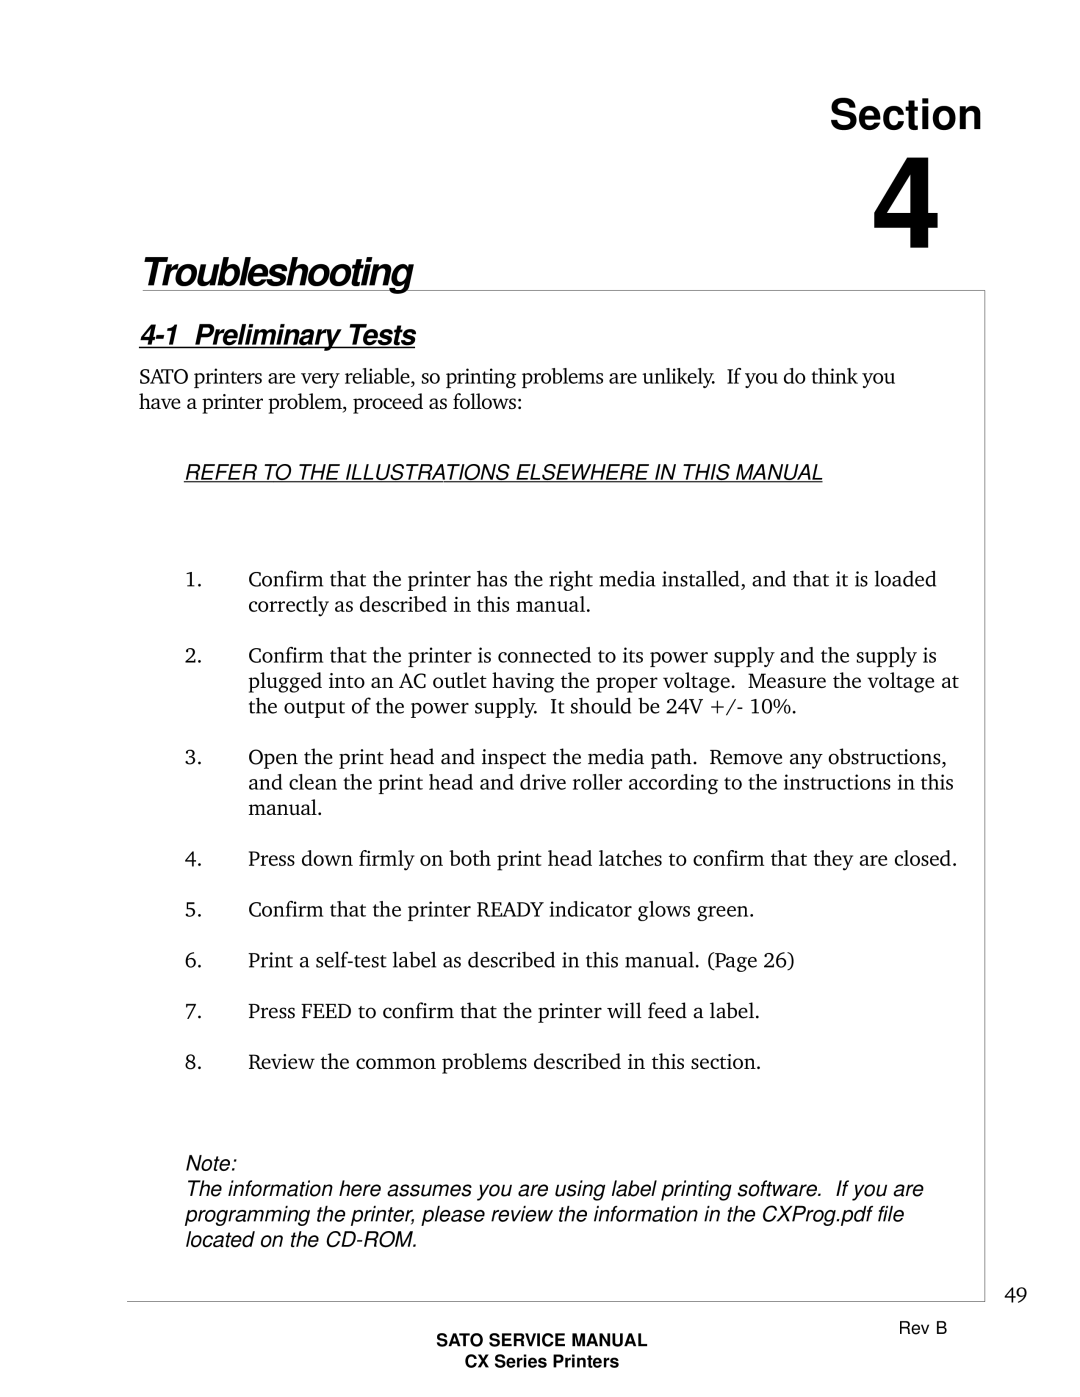 SATO CX200 manual Troubleshooting, Preliminary Tests, Refer To The Illustrations Elsewhere In This Manual, Section 